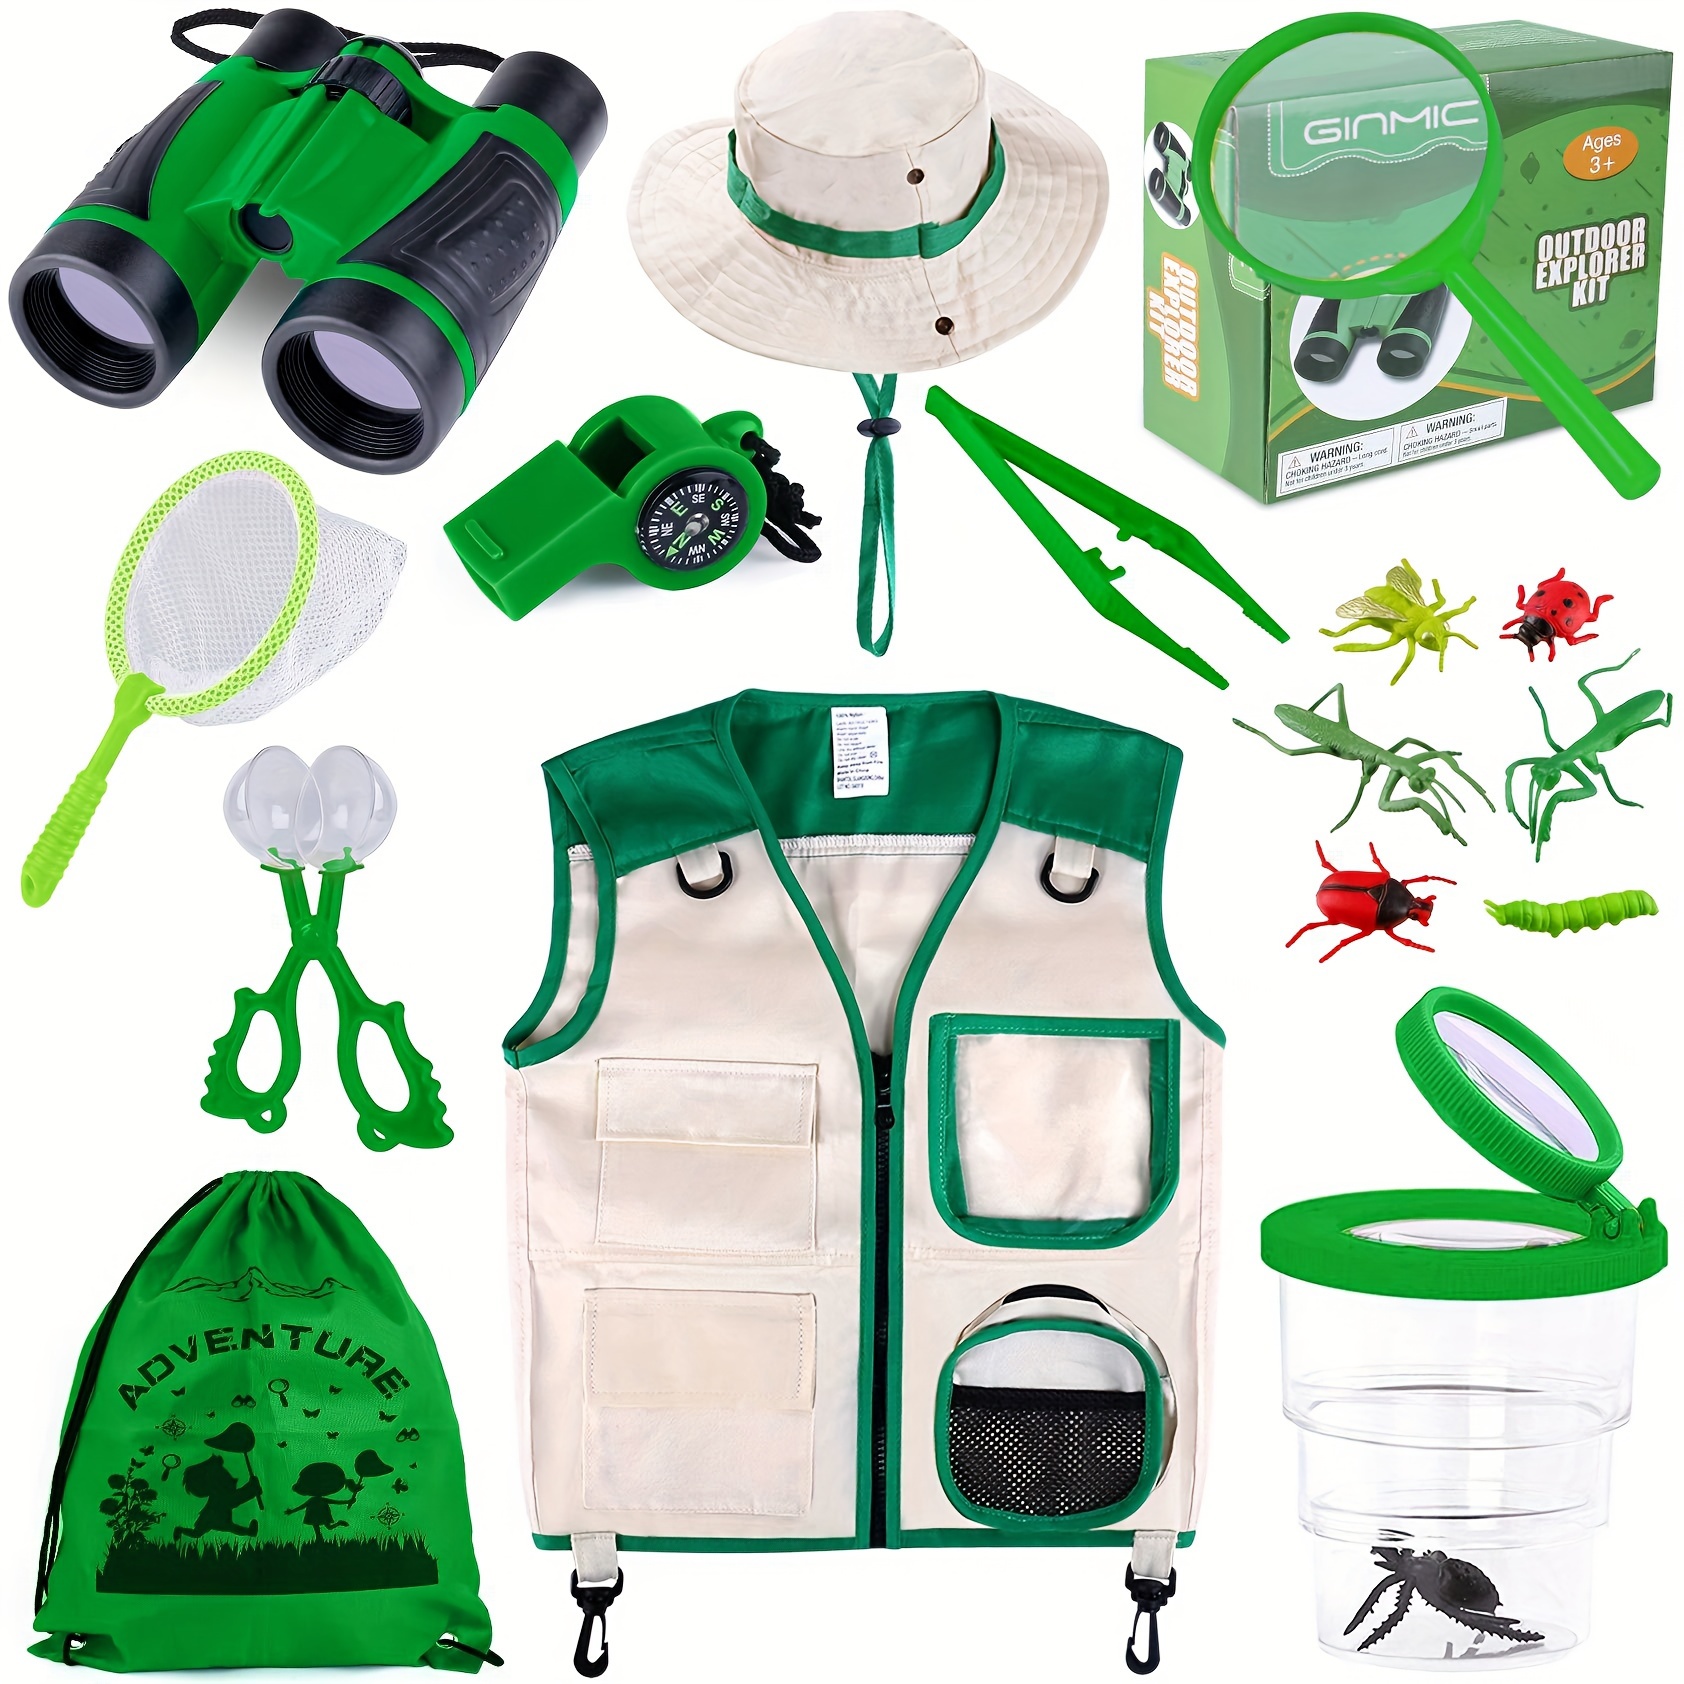 

Kids Explorer Kit & Bug Catching Kit, 11 Pcs Outdoor Exploration Kit For Kids Camping With Binoculars, Adventure, Hunting, Hiking, Educational Toy Gift For 3-12 Years Old Boys Girls